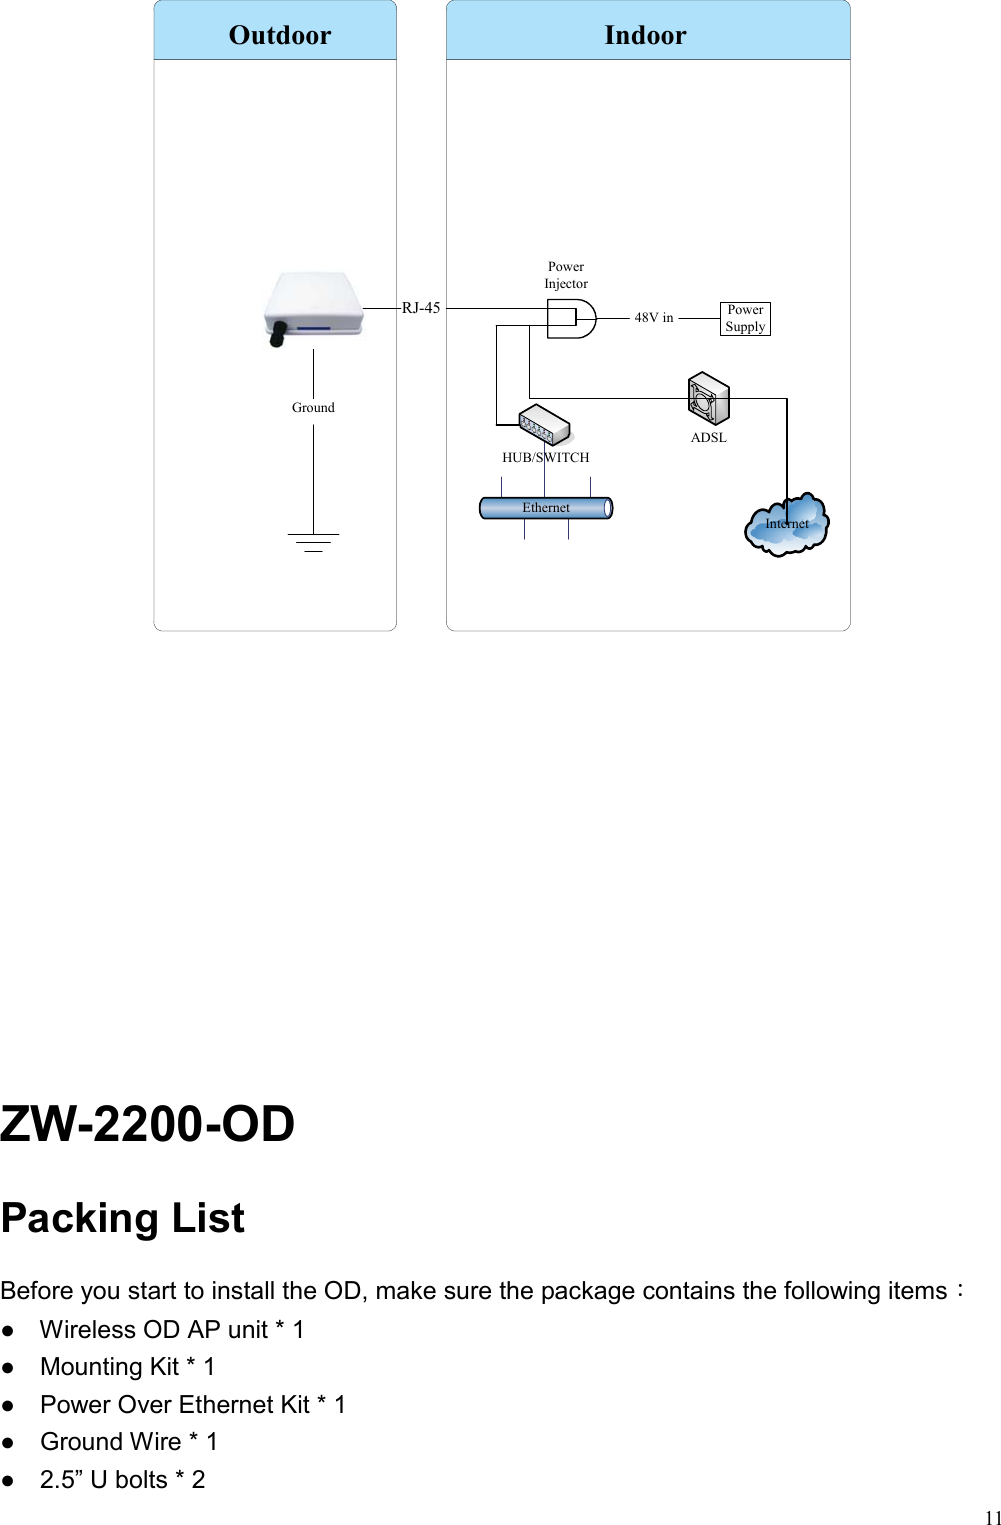  11             ZW-2200-OD Packing List Before you start to install the OD, make sure the package contains the following items： ●    Wireless OD AP unit * 1 ●  Mounting Kit * 1 ●    Power Over Ethernet Kit * 1 ●  Ground Wire * 1   ●  2.5” U bolts * 2   InternetEthernetHUB/SWITCHADSLGroundOutdoor IndoorPower InjectorPower SupplyRJ-45 48V in